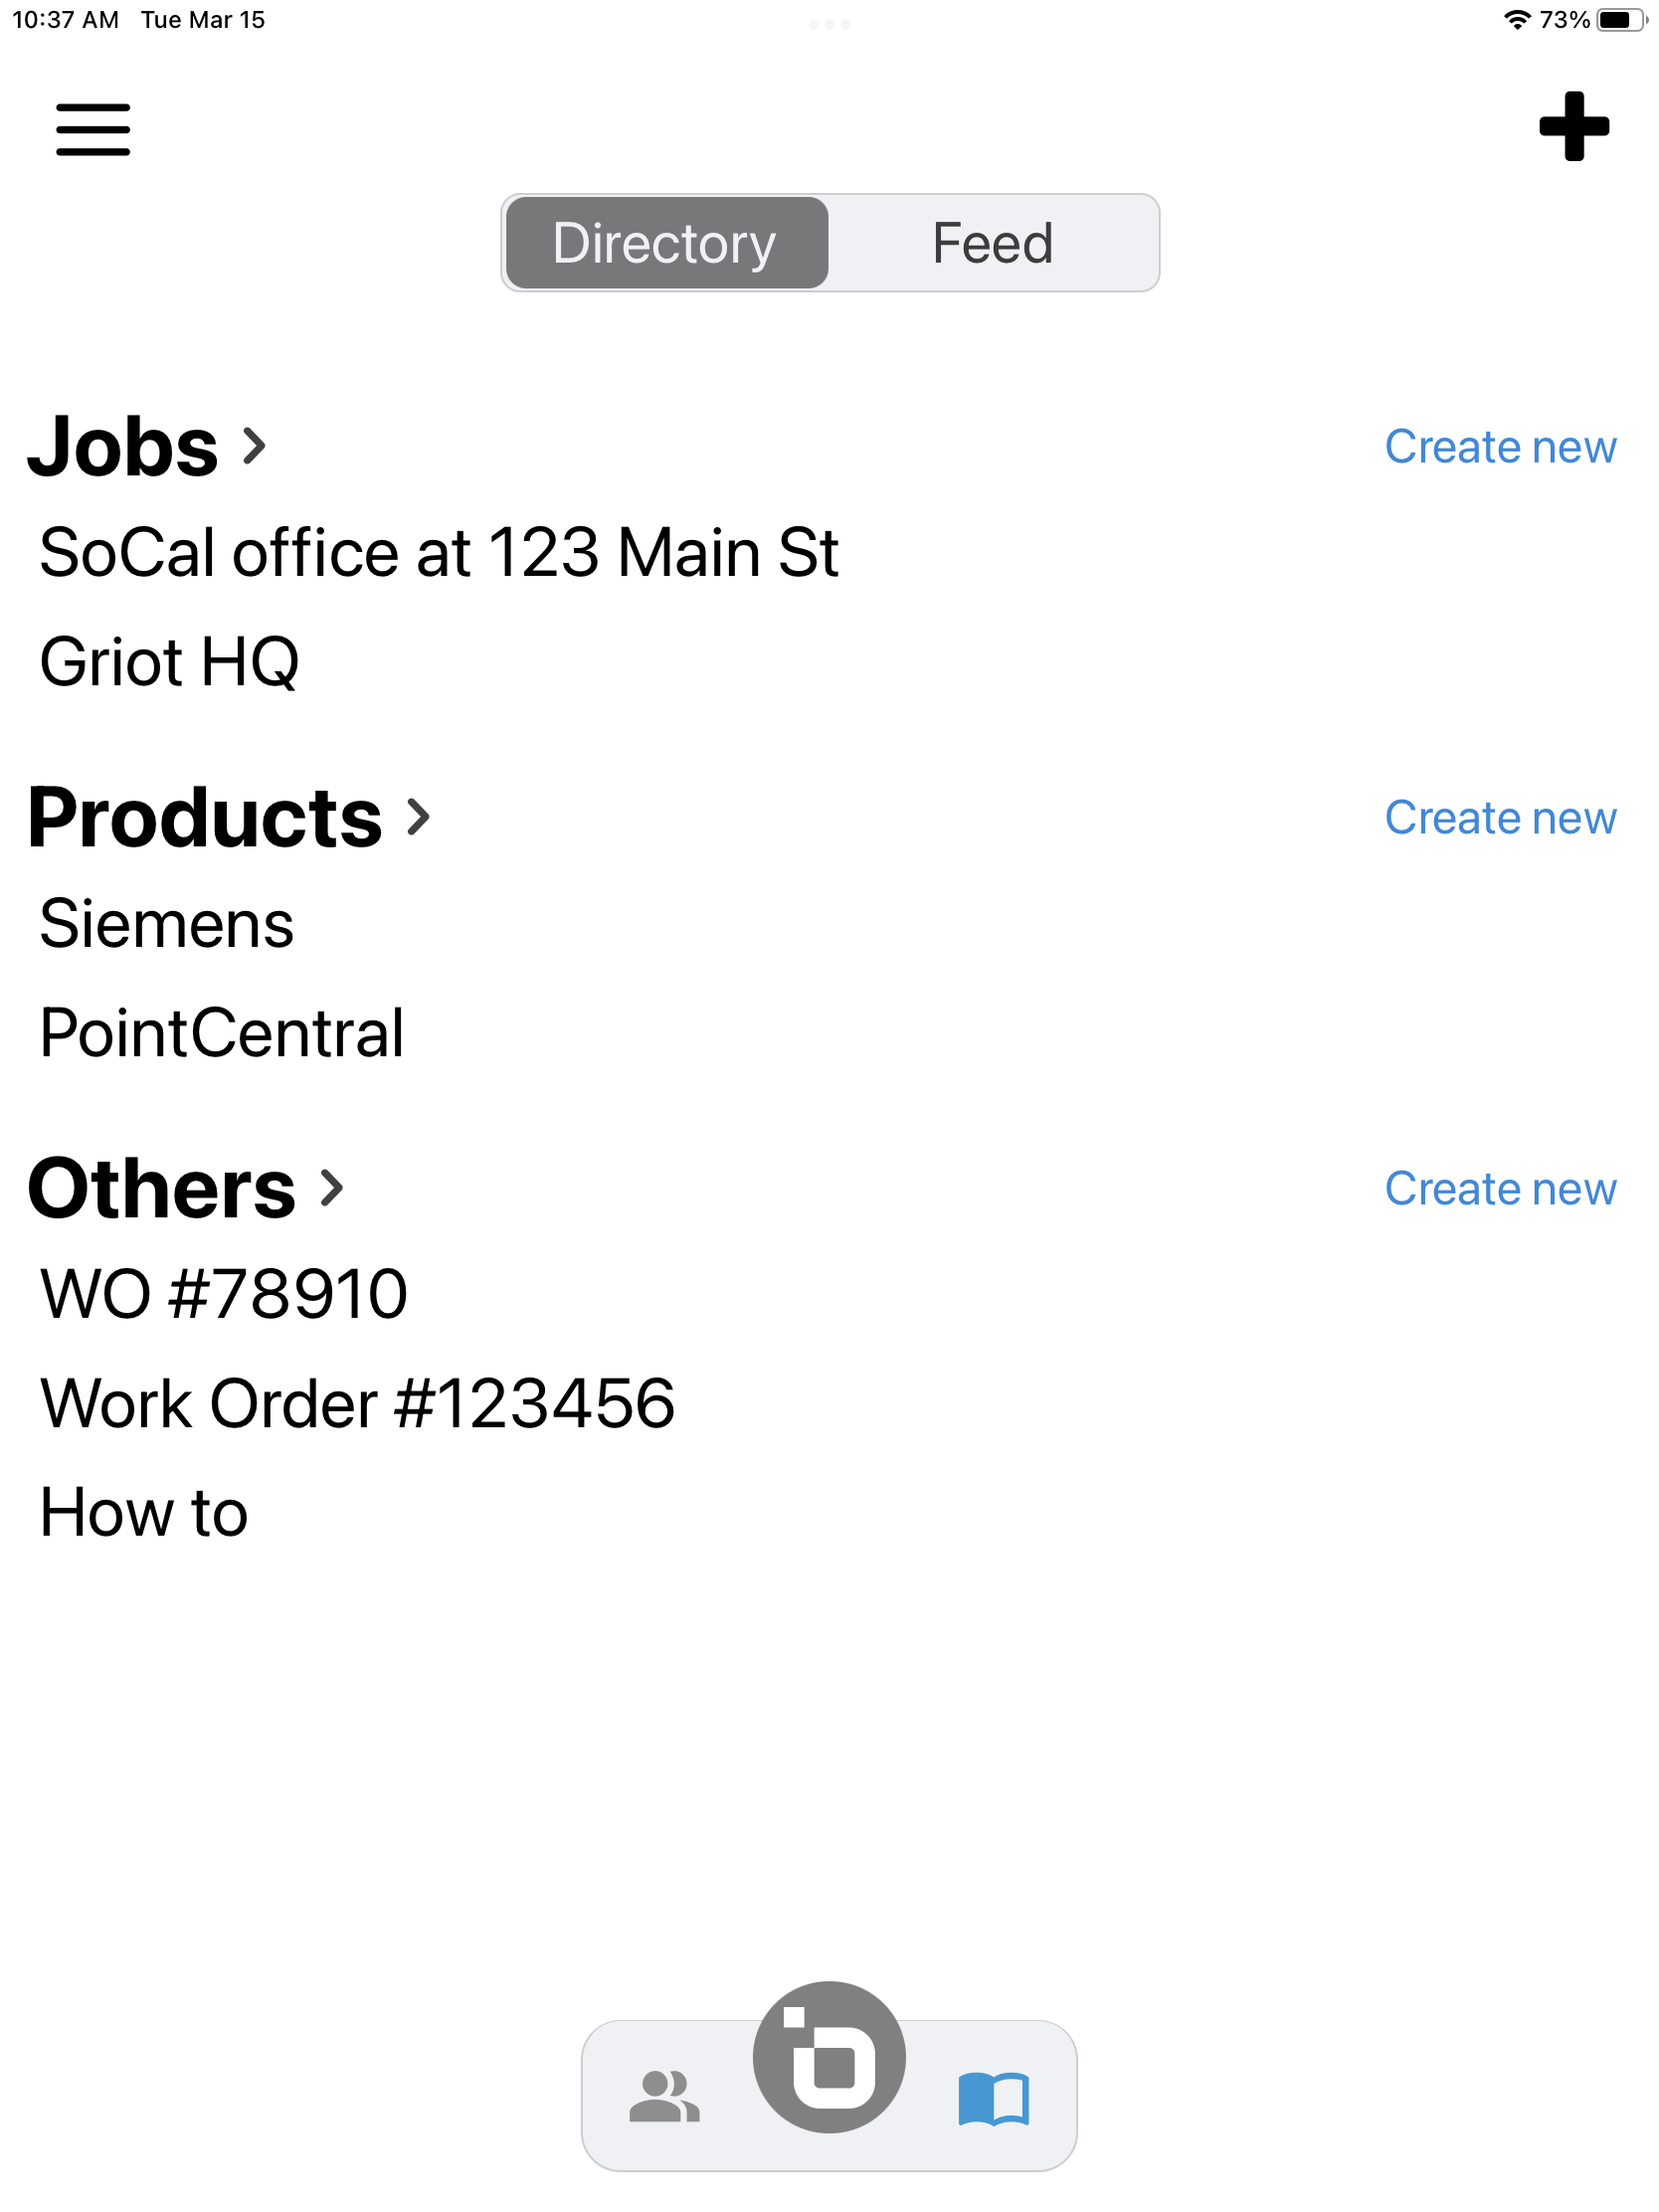 Easily organize tribal knowledge across job and product folders